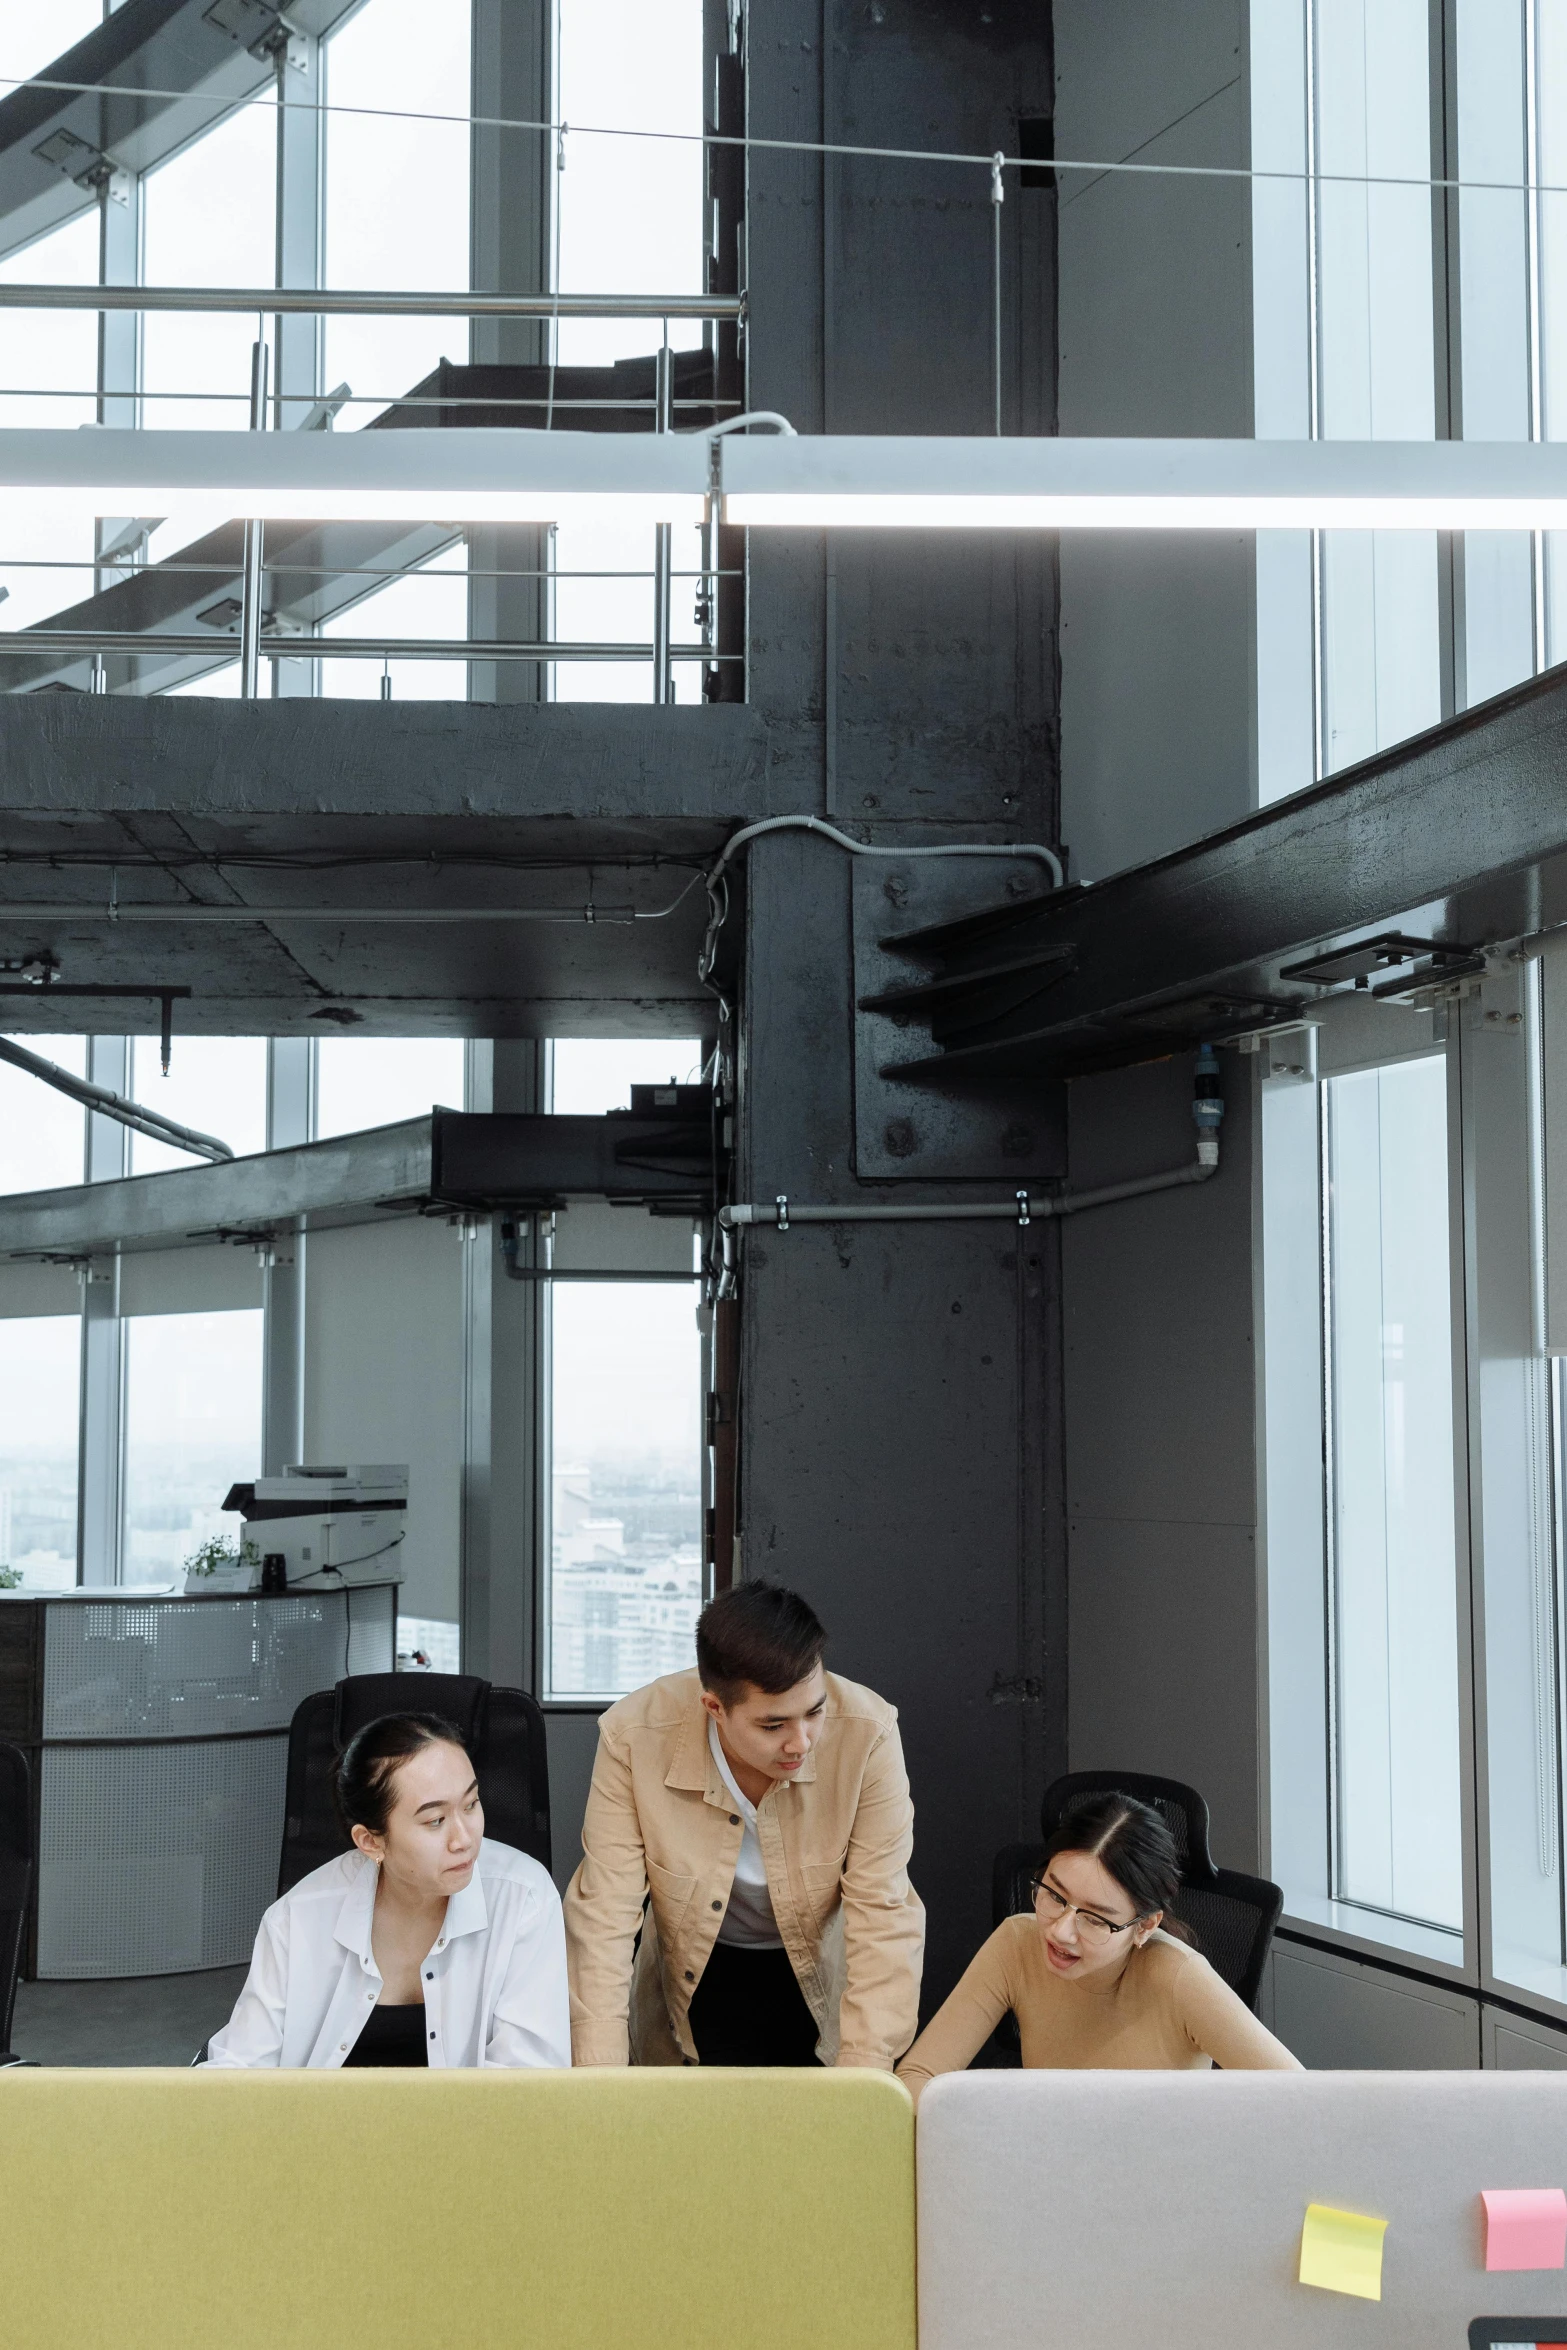 a group of people working on laptops in an office, by Sebastian Vrancx, pexels contest winner, renaissance, tall metal towers, asian descend, commercial banner, vertical orientation